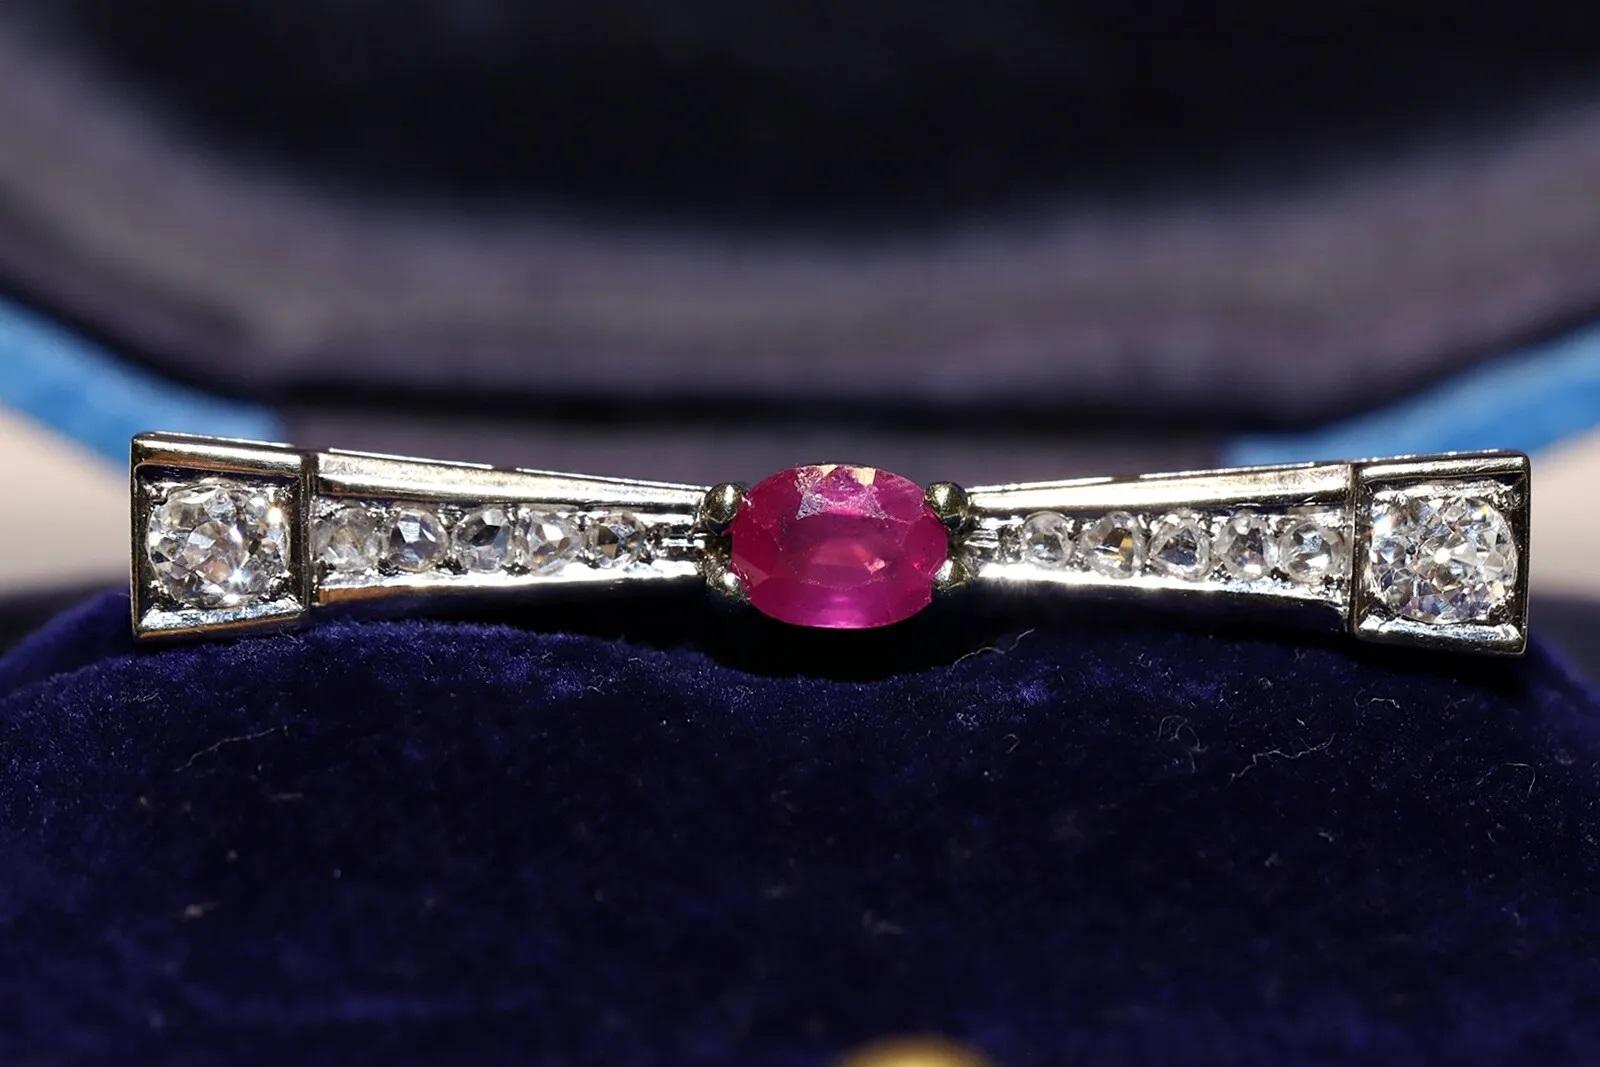 In very good condition.
Total weight is 6.1 grams.
Totally is brilliant cut diamond  0.65 carat.
Totally is rose cut diamond 0.25 carat.
Totally is ruby about 0.75 carat.
Dimention is brooche 4.1x0.7 cm.
Box is not included.
Please contact for any